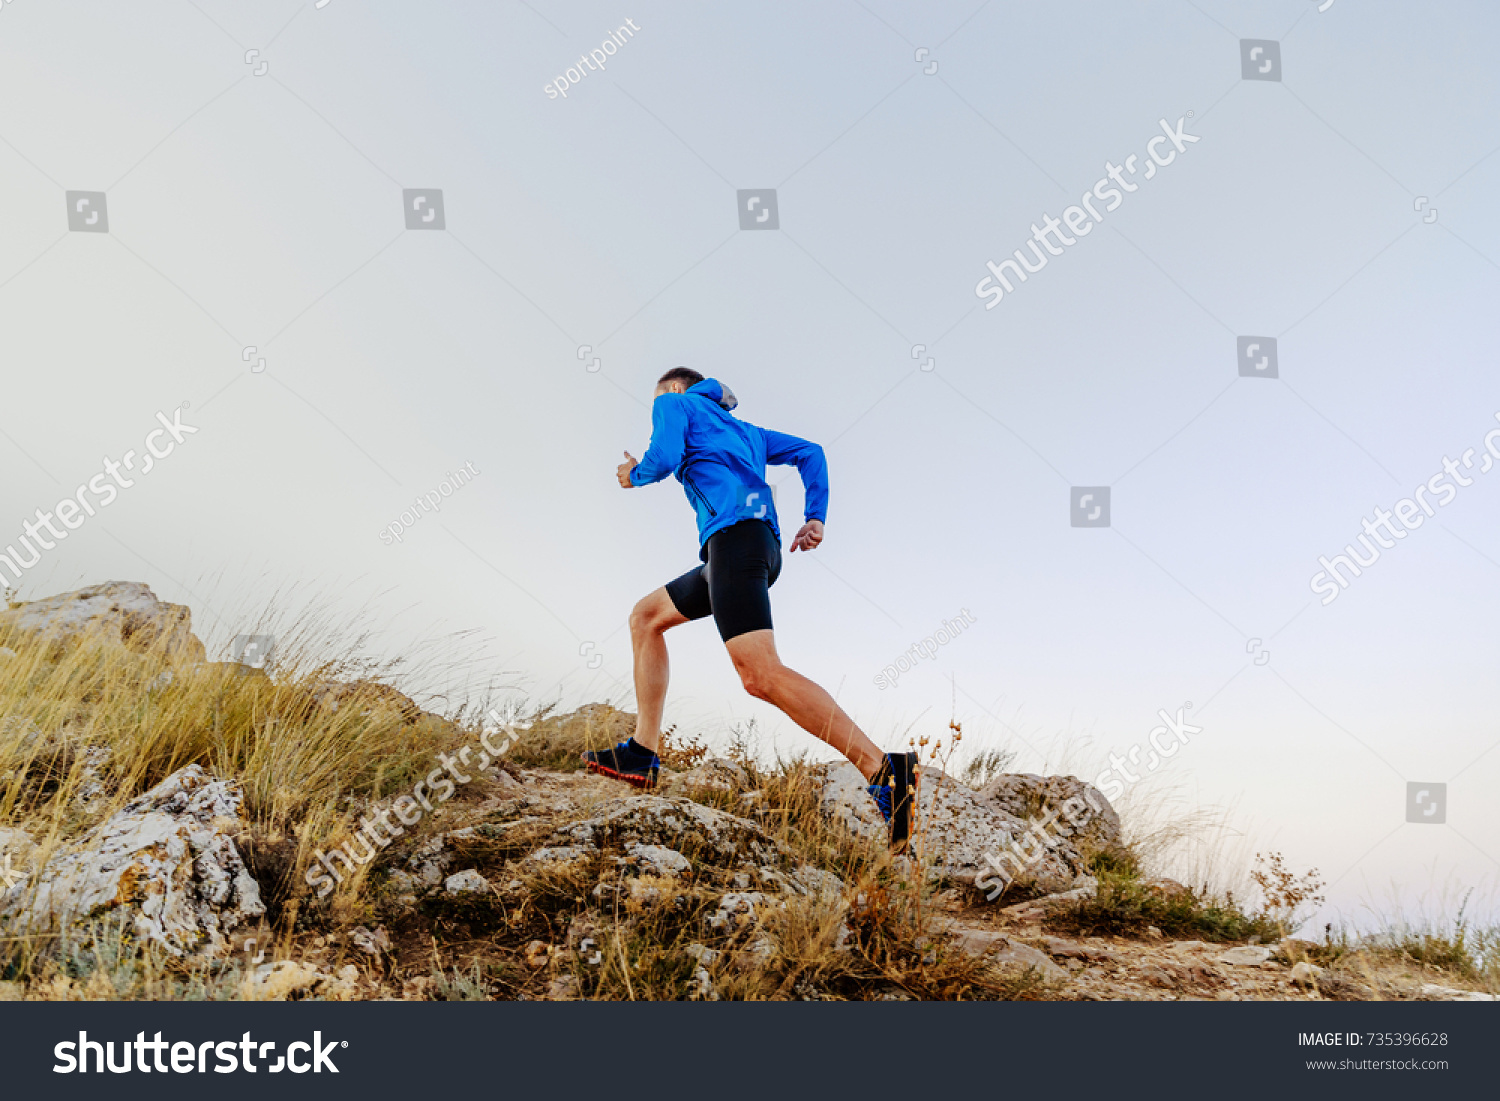 running uphill on stones male athlete runner side view #735396628